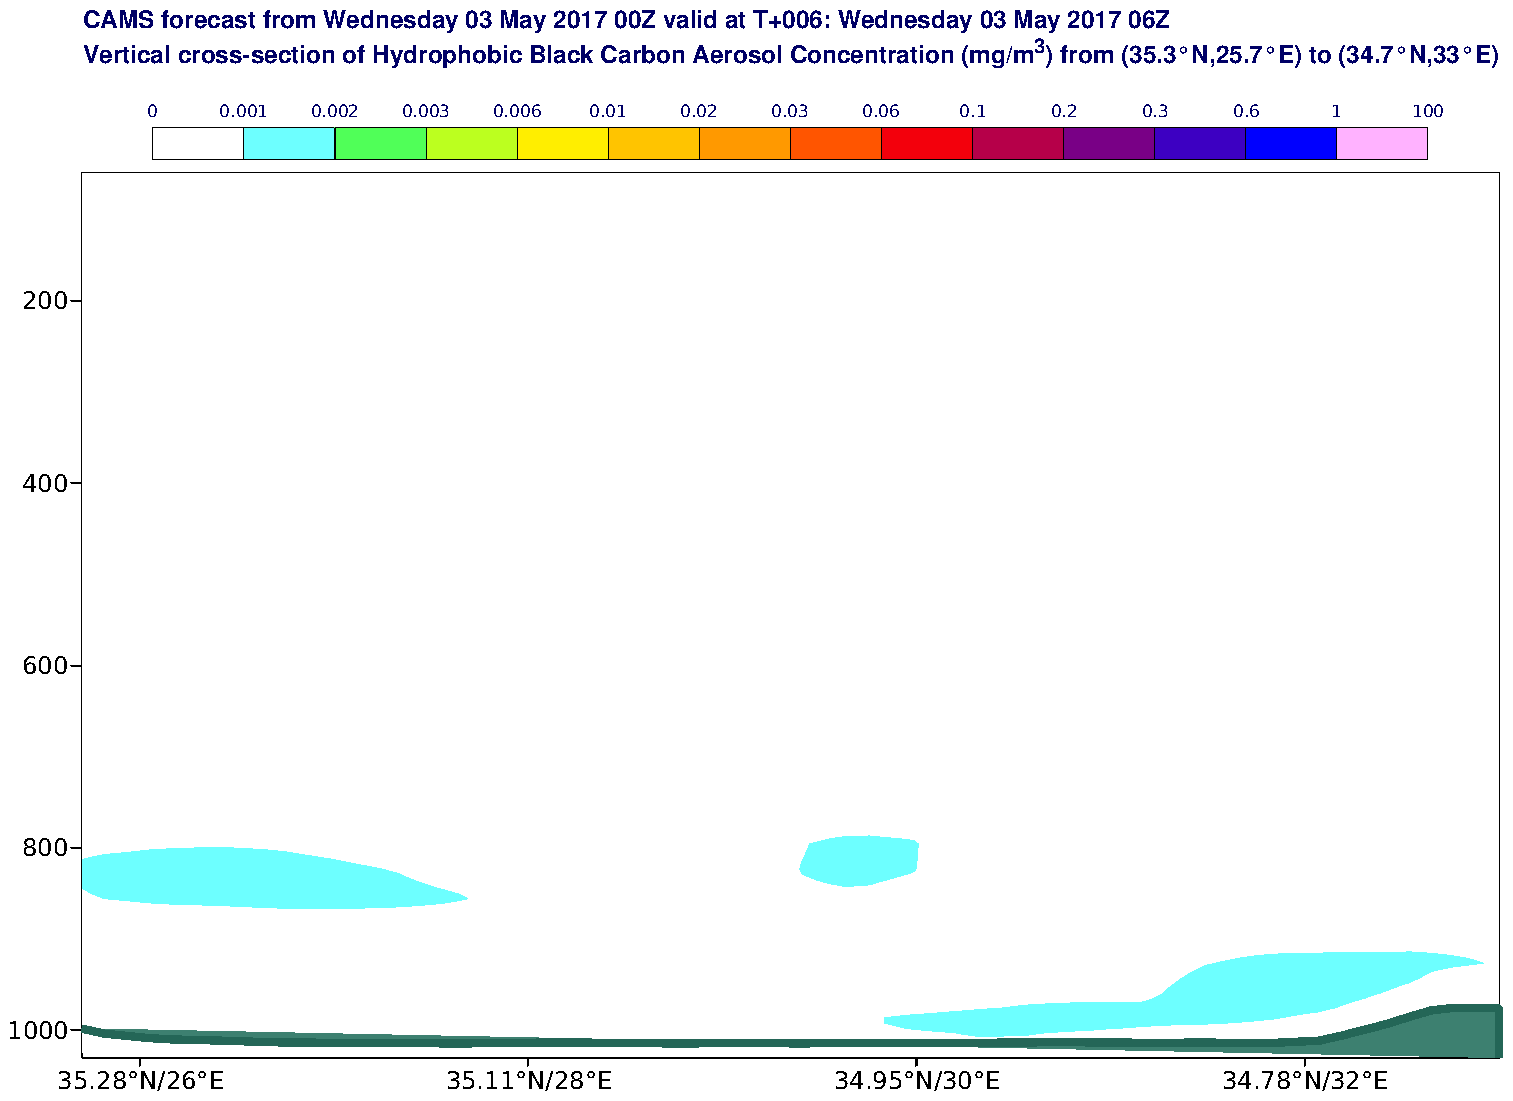 Vertical cross-section of Hydrophobic Black Carbon Aerosol Concentration (mg/m3) valid at T6 - 2017-05-03 06:00